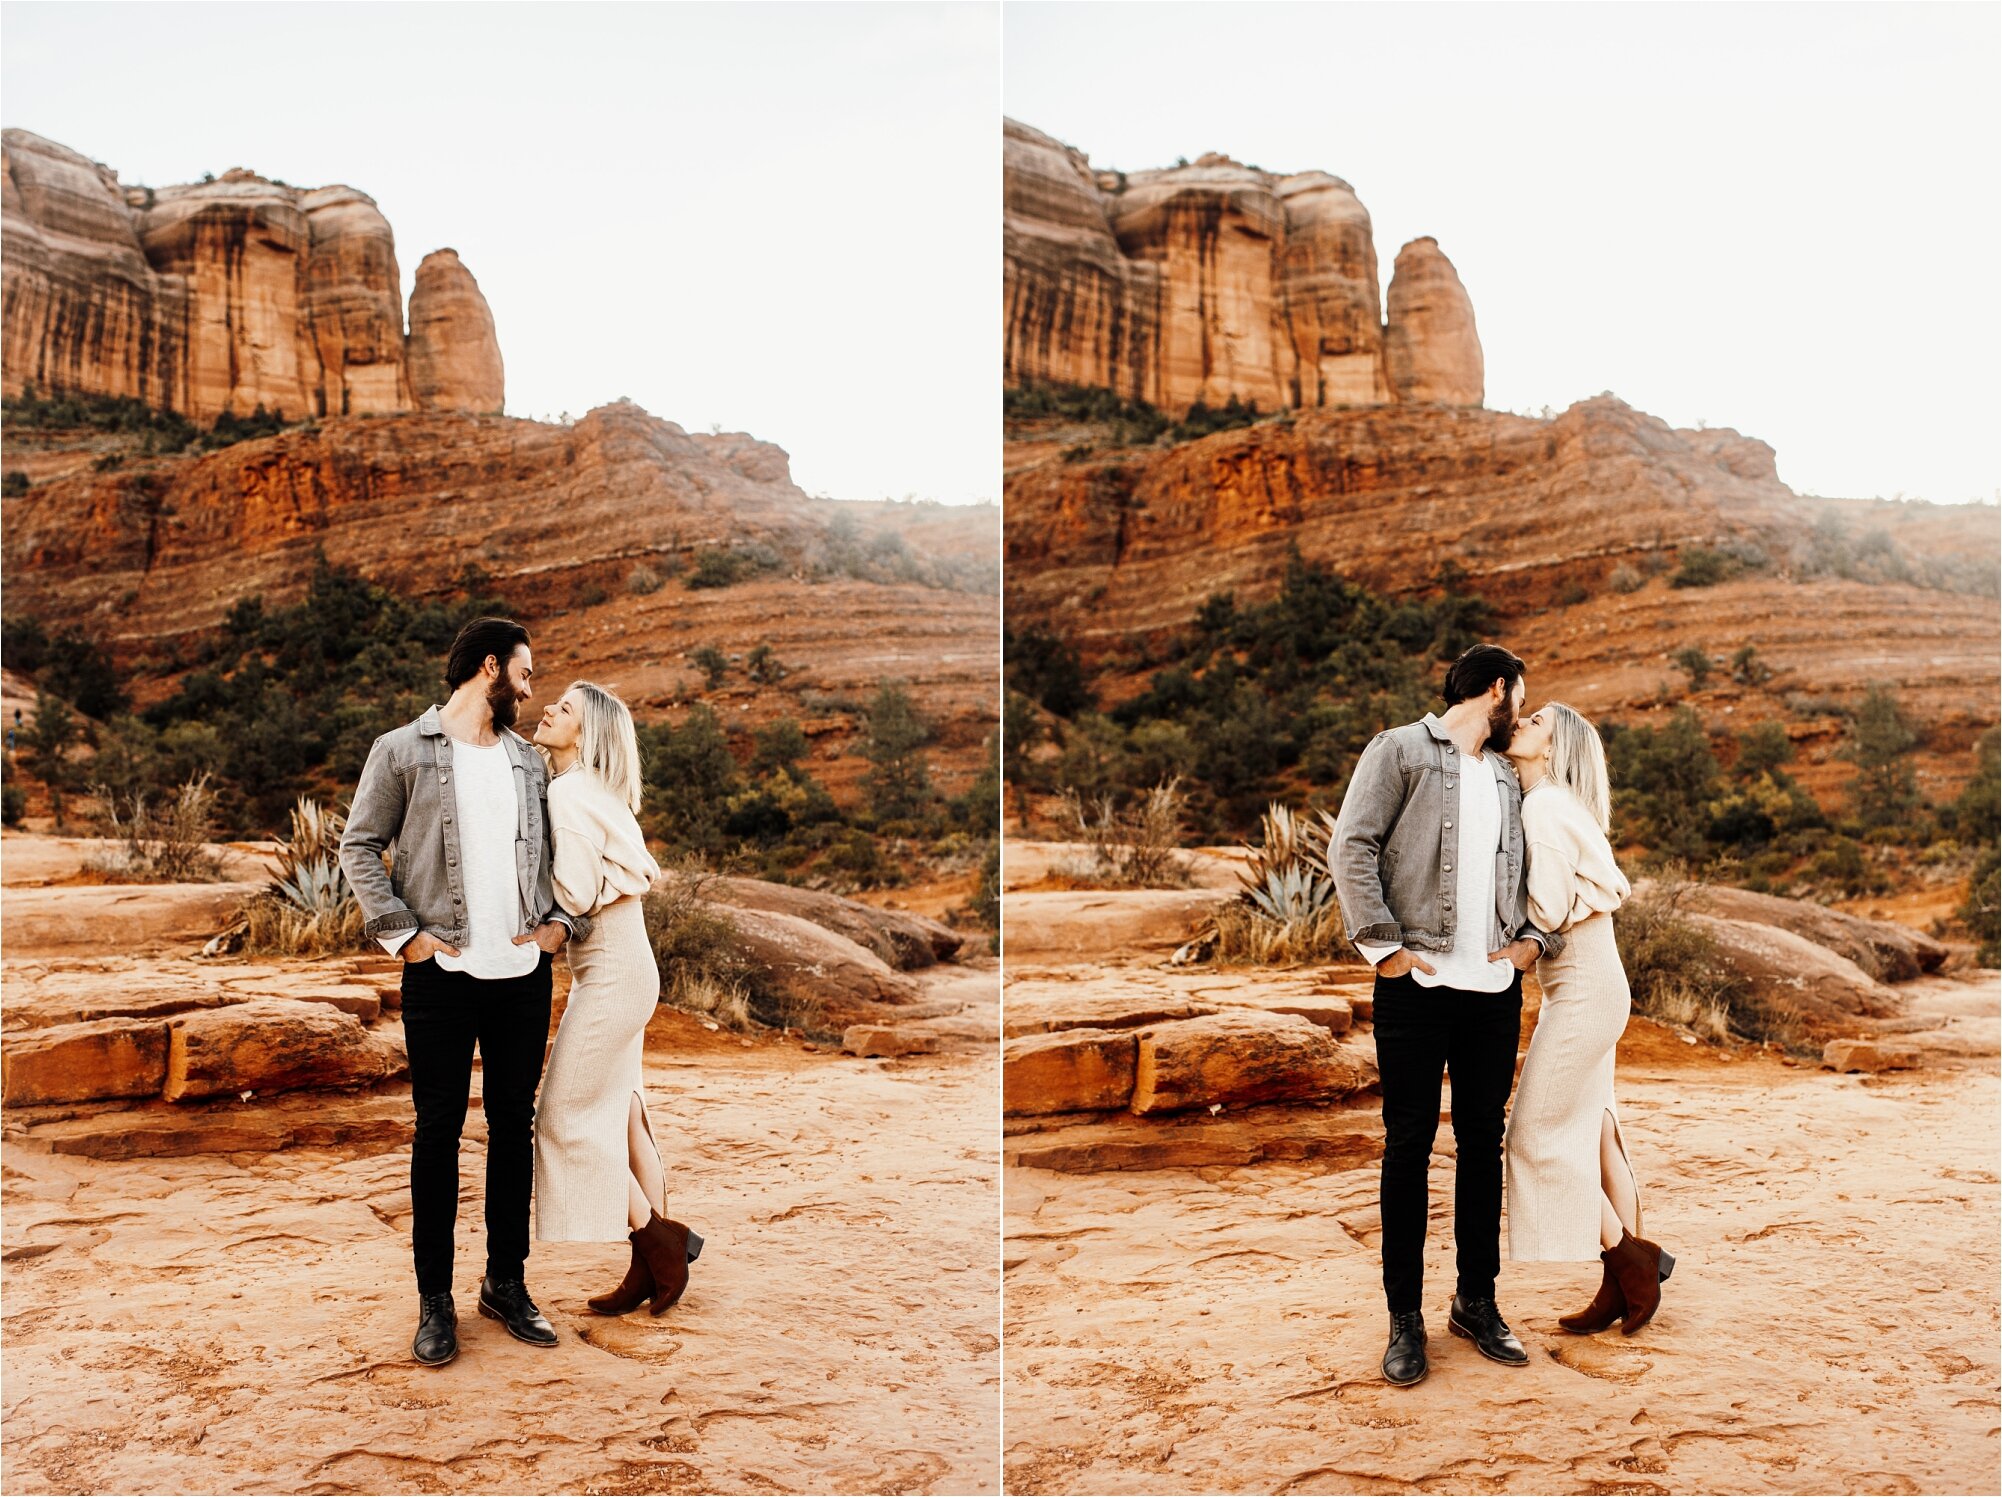  sedona arizona engaged couple taking photos for save the date wedding at cathedral rock 